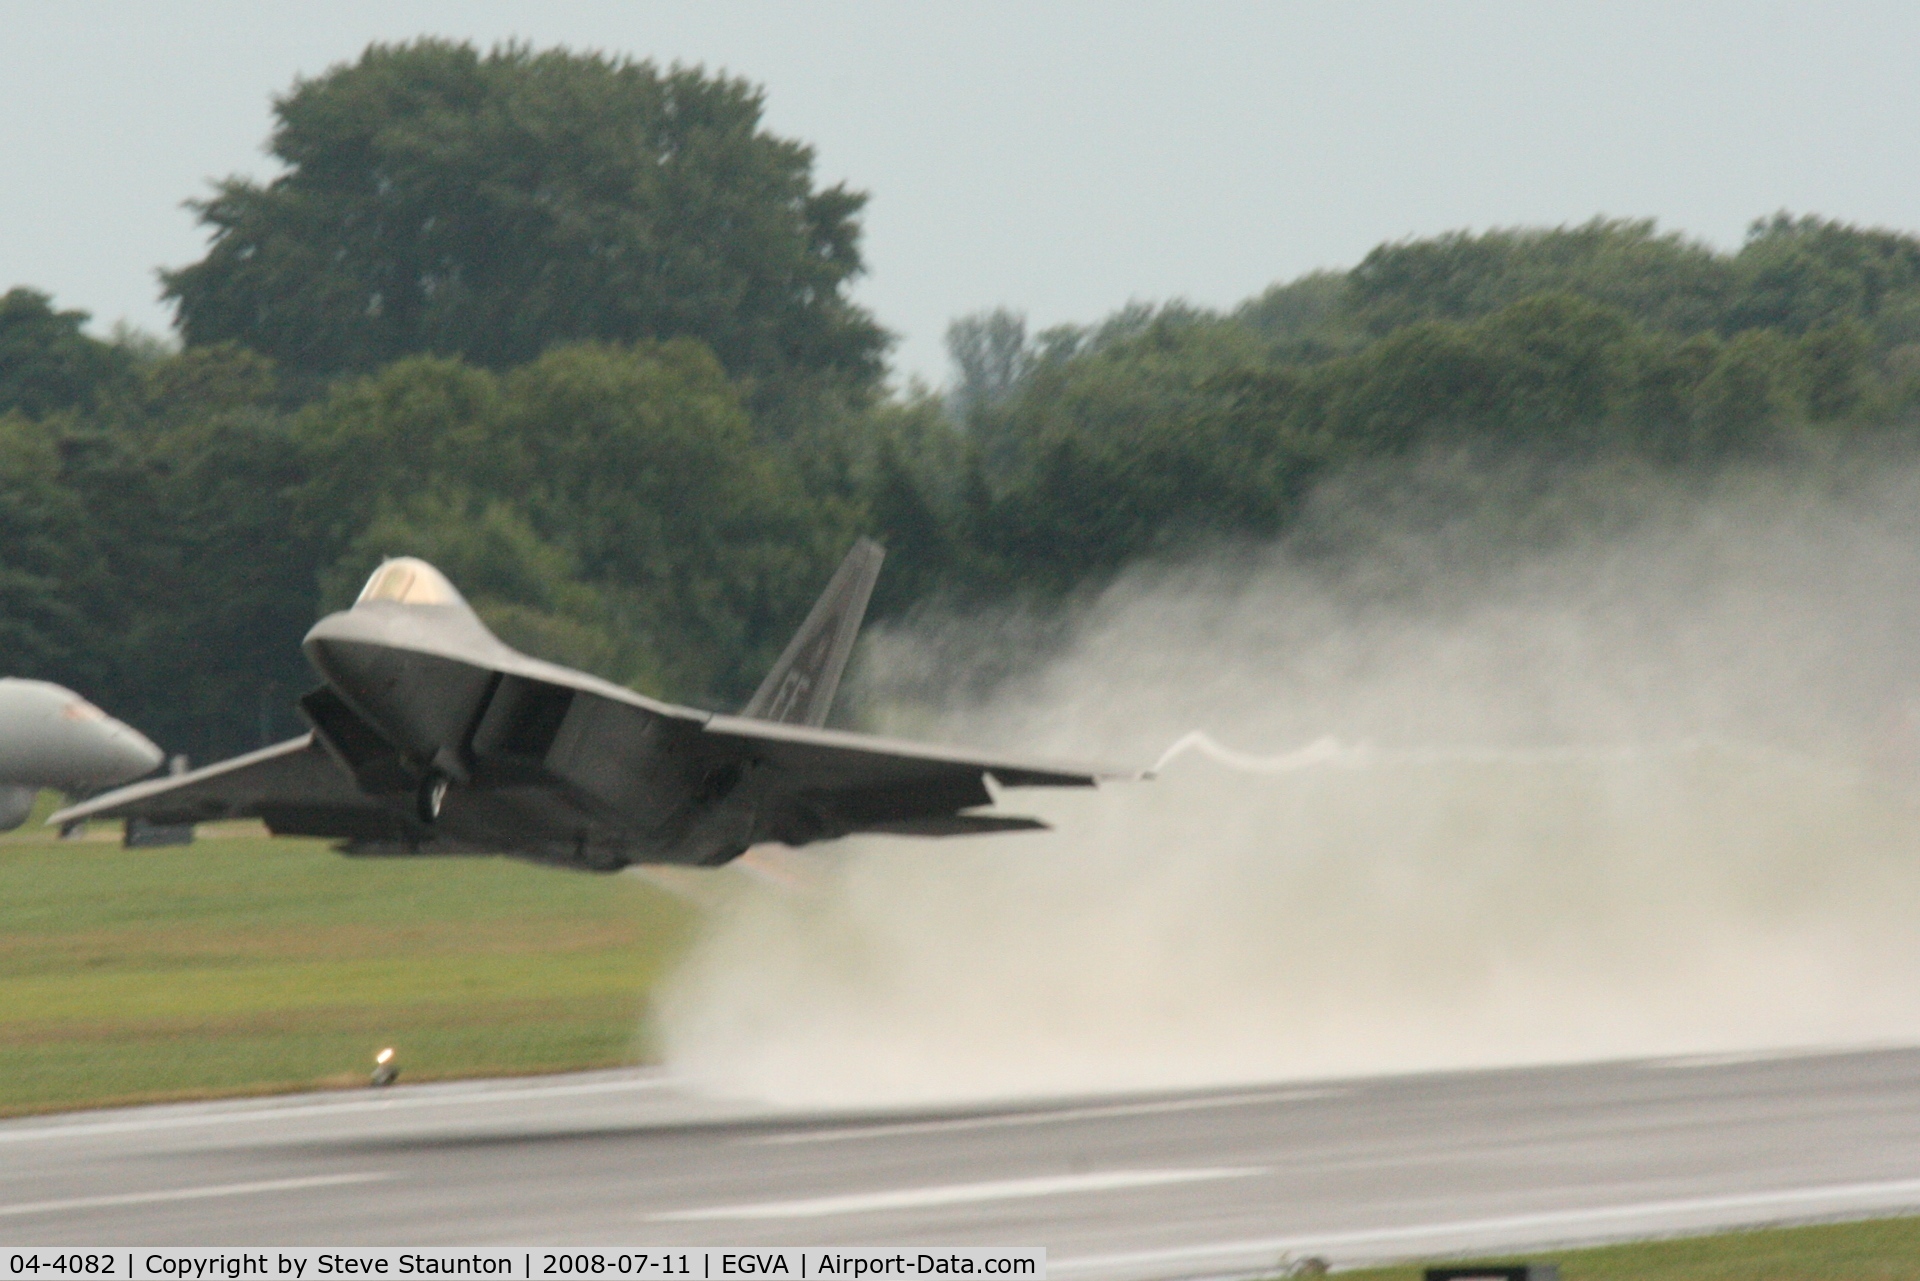 04-4082, 2004 Lockheed Martin F-22A Raptor C/N 4082, Taken at the Royal International Air Tattoo 2008 during arrivals and departures (show days cancelled due to bad weather)